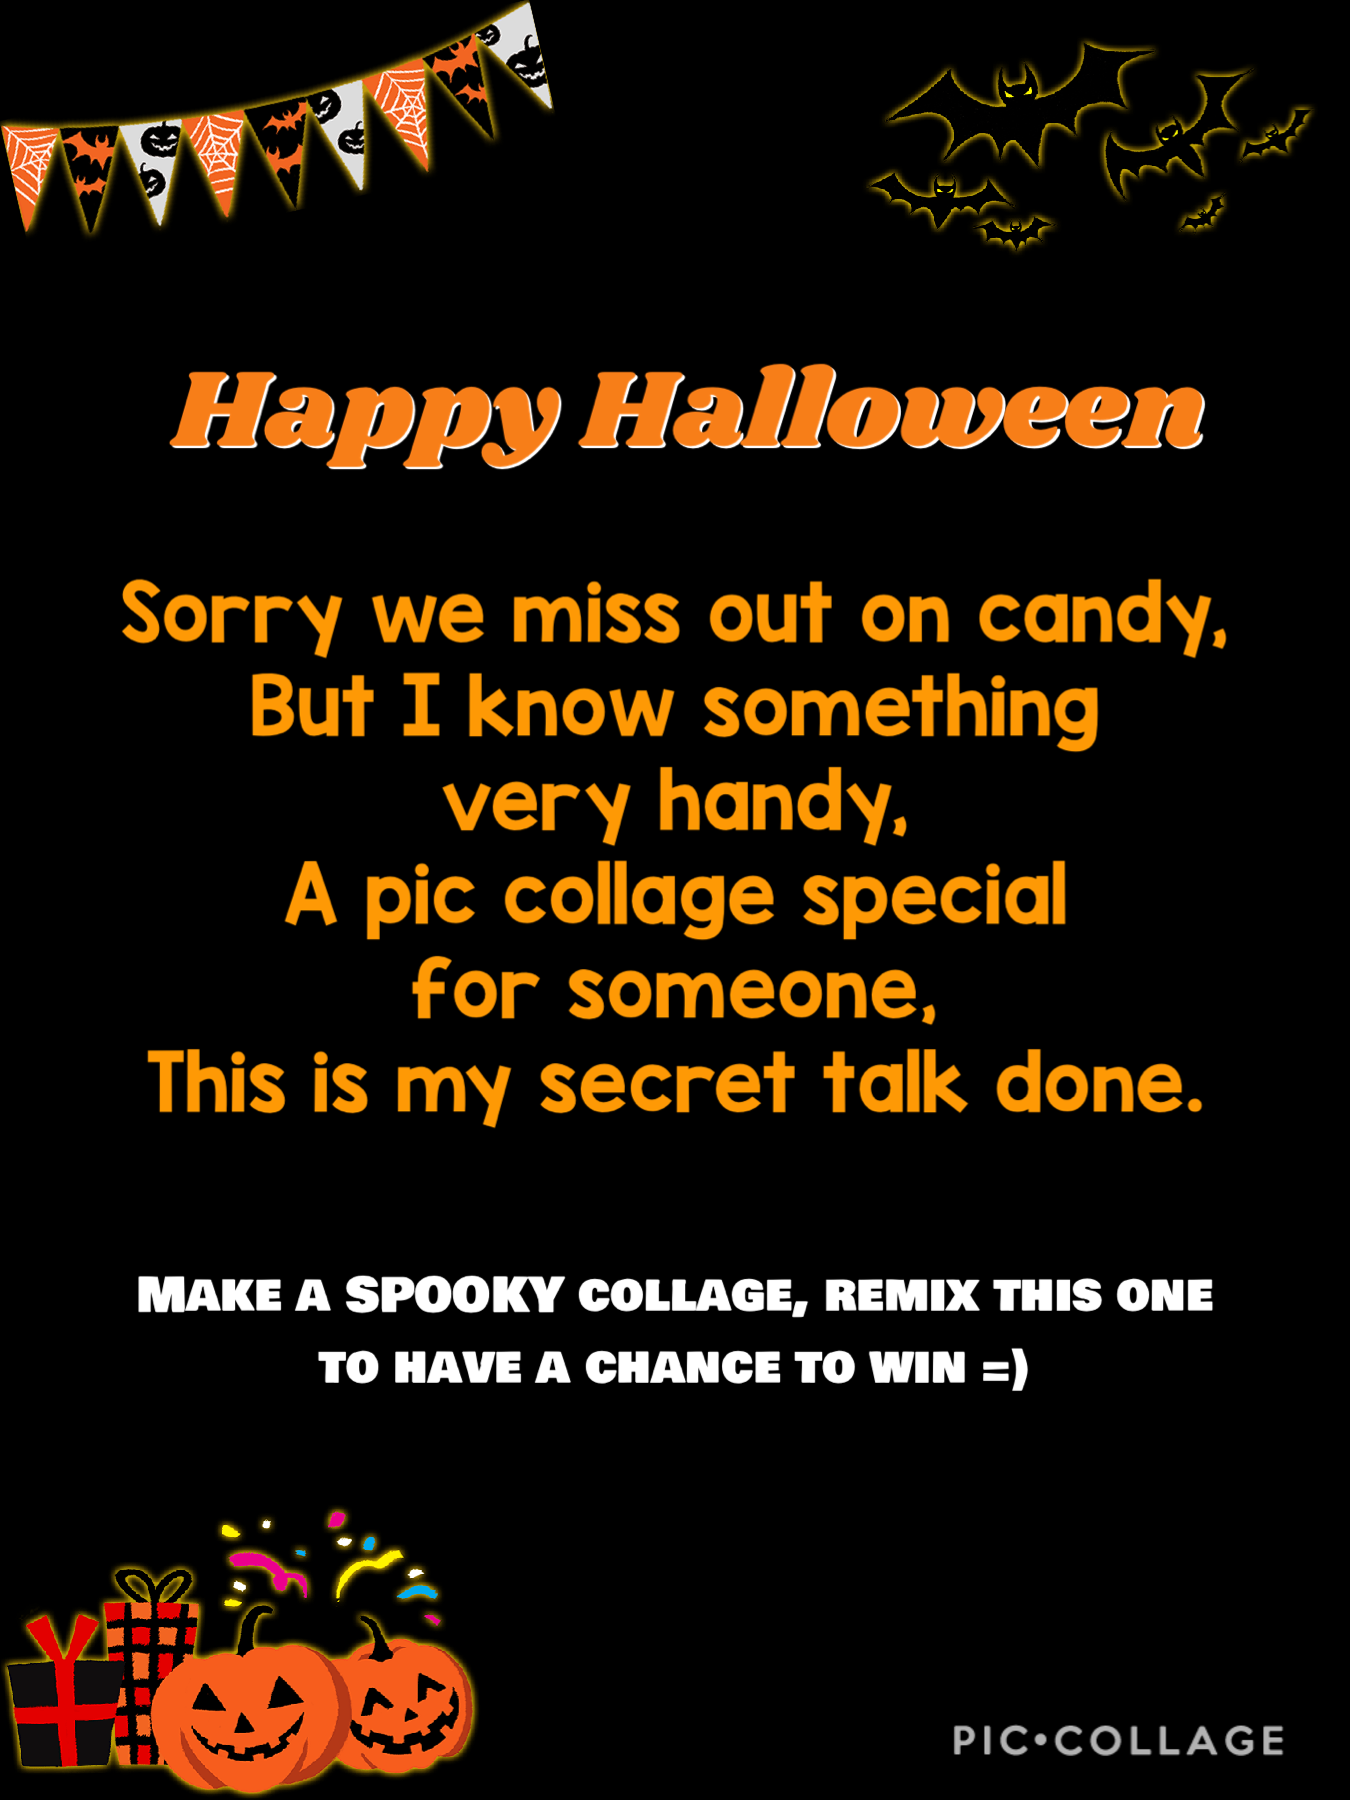 Spooky competition =)